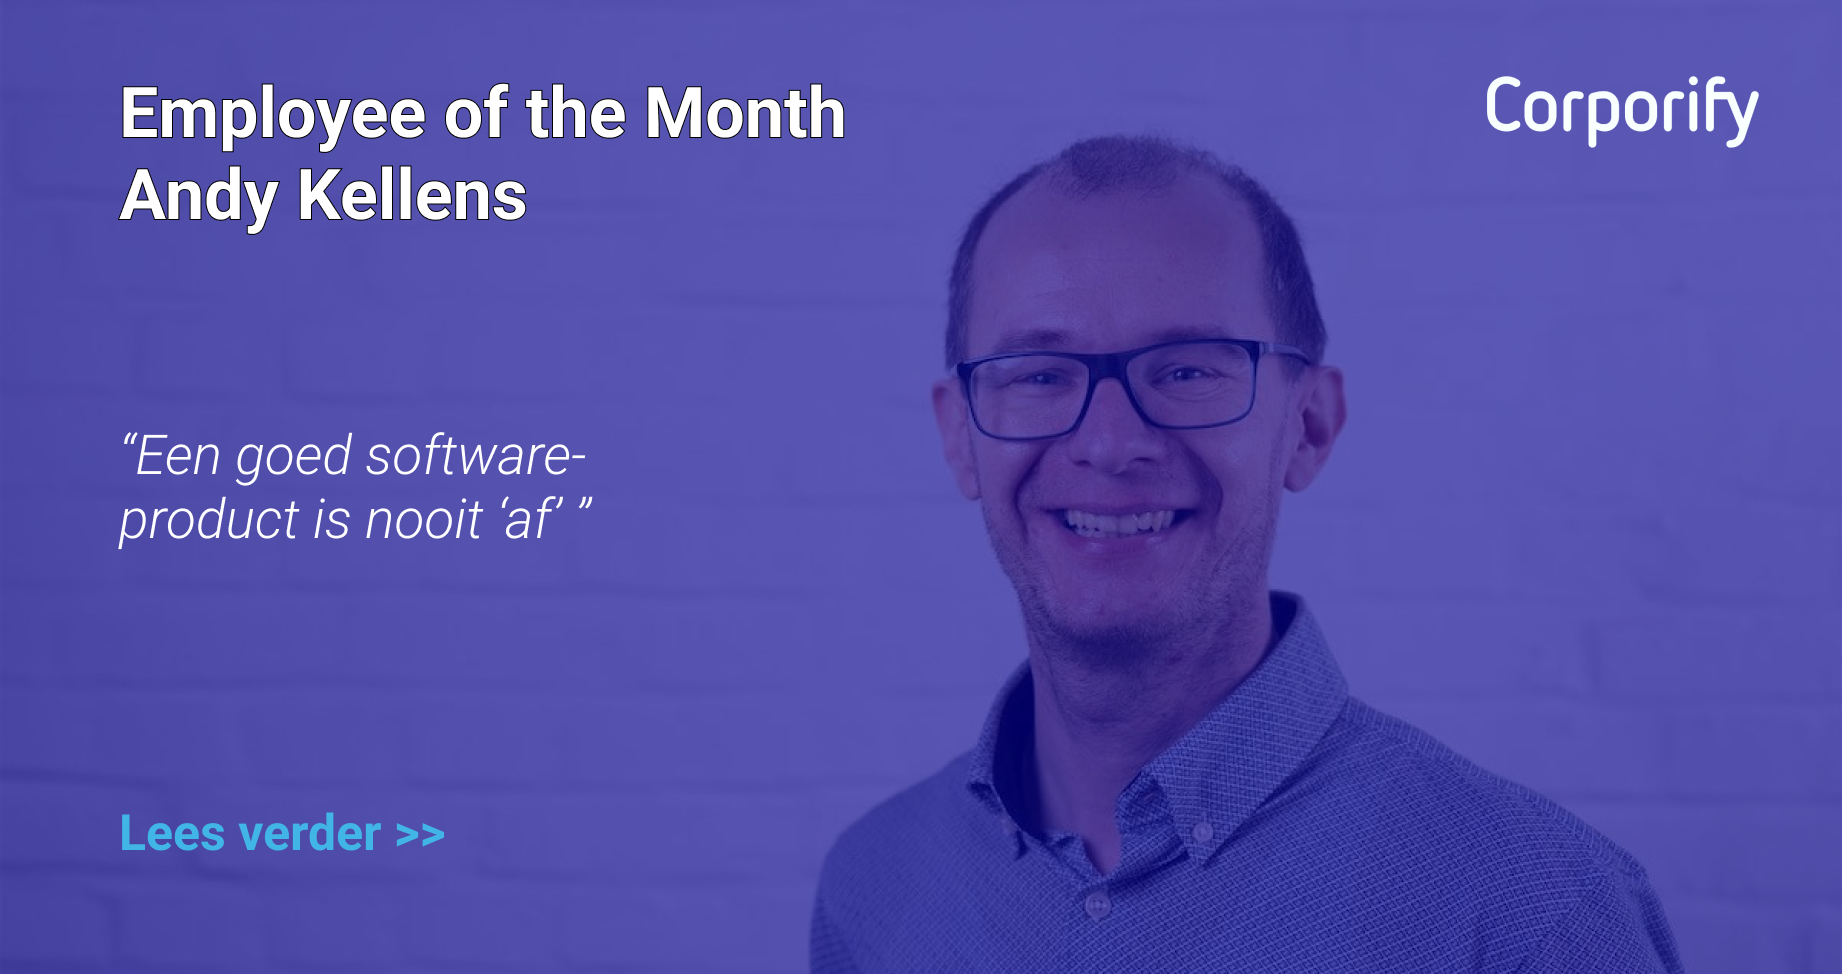 Employee of the Month - Andy Kellens (NL)